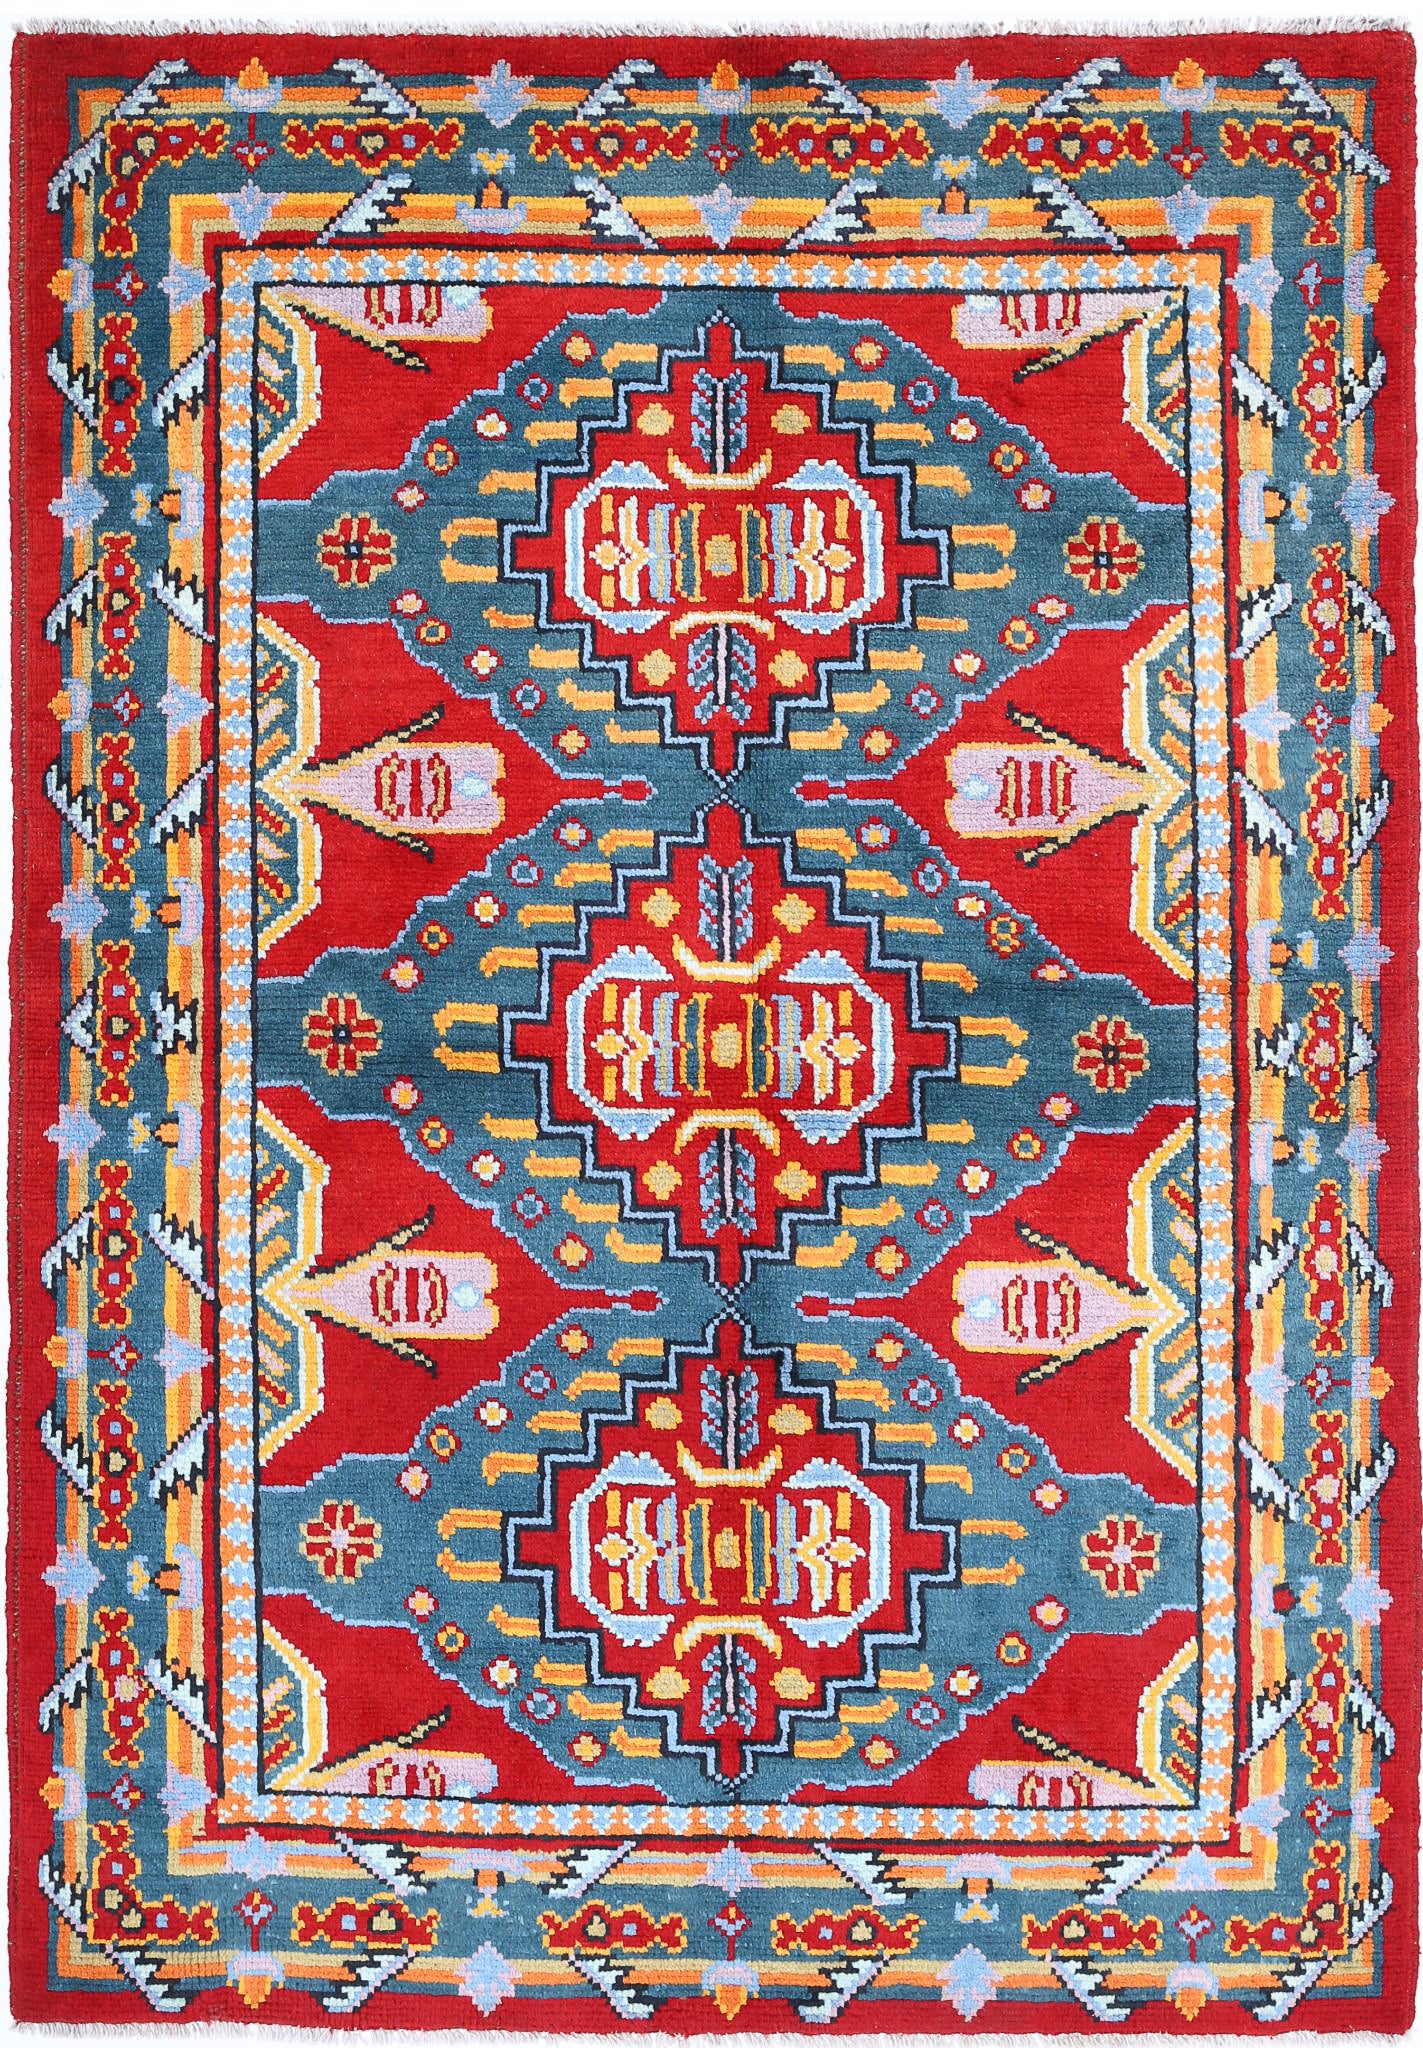 Revival-hand-knotted-qarghani-wool-rug-5014210.jpg